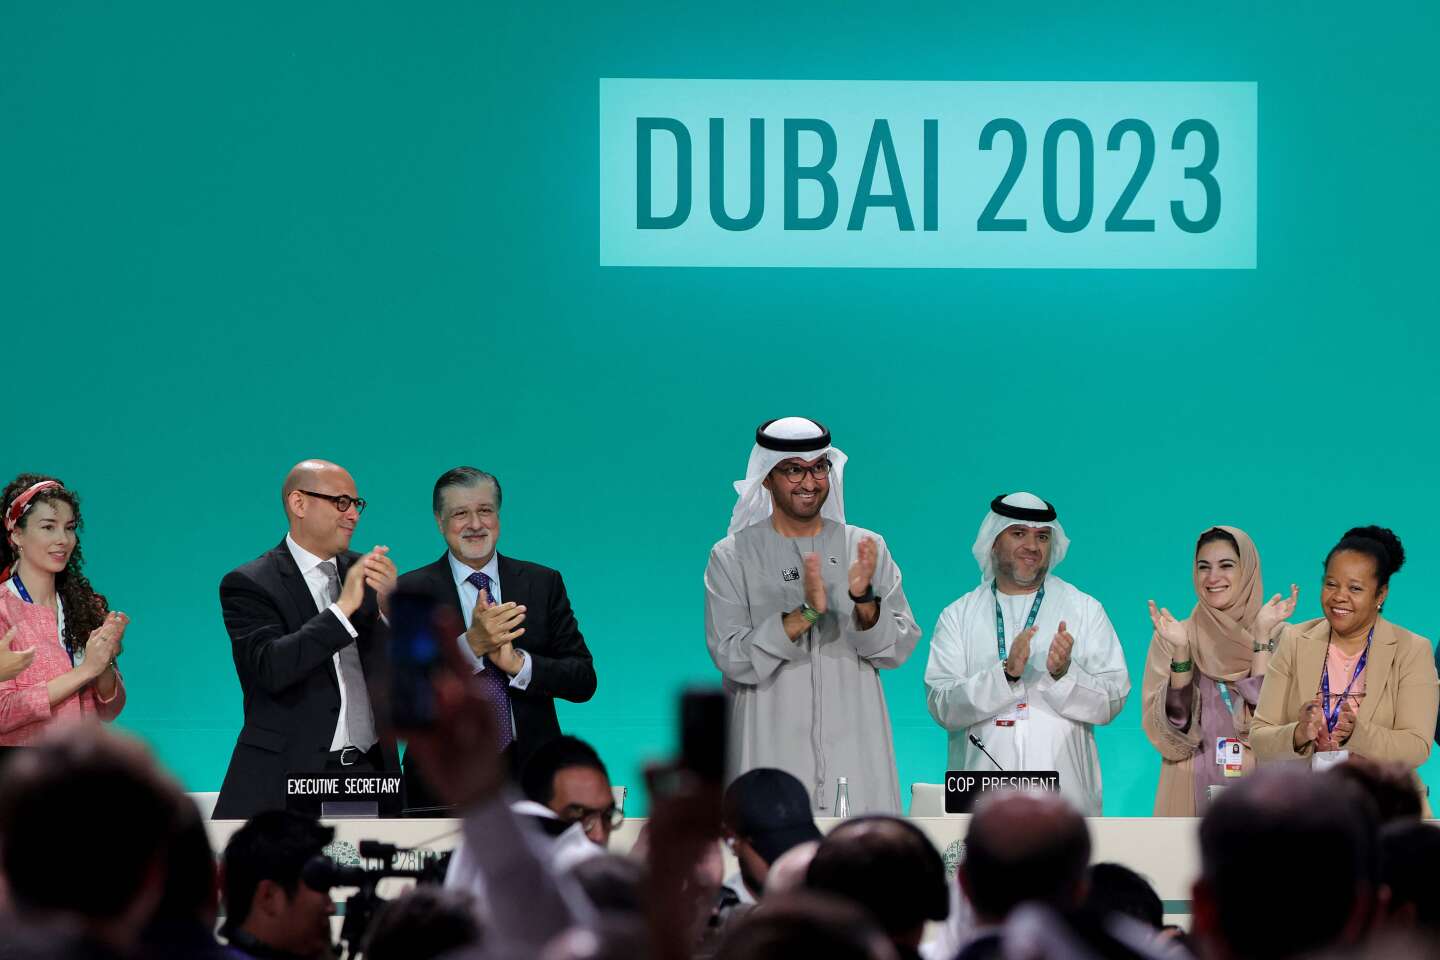 Historic Agreement on “Switching Away from Fossil Fuels” in Dubai